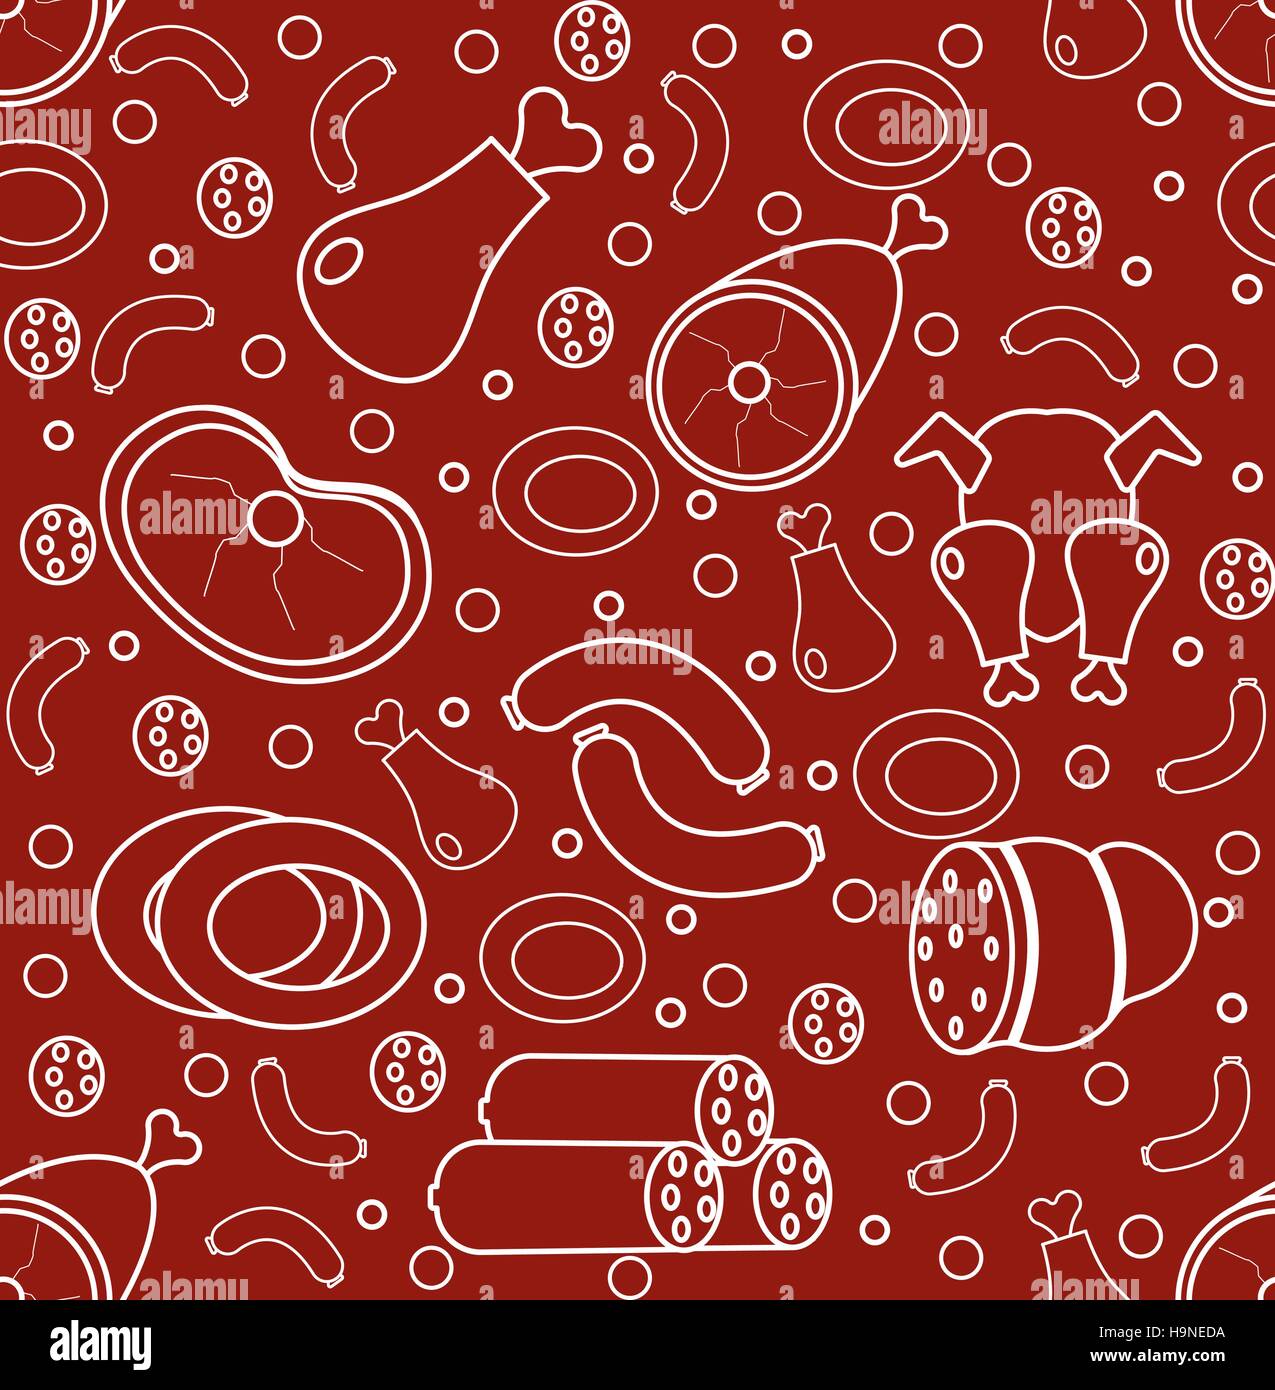 Meat products seamless pattern, modern line, doodle, sketch style. Meats and sausage endless background, texture. Vector illustration Stock Vector